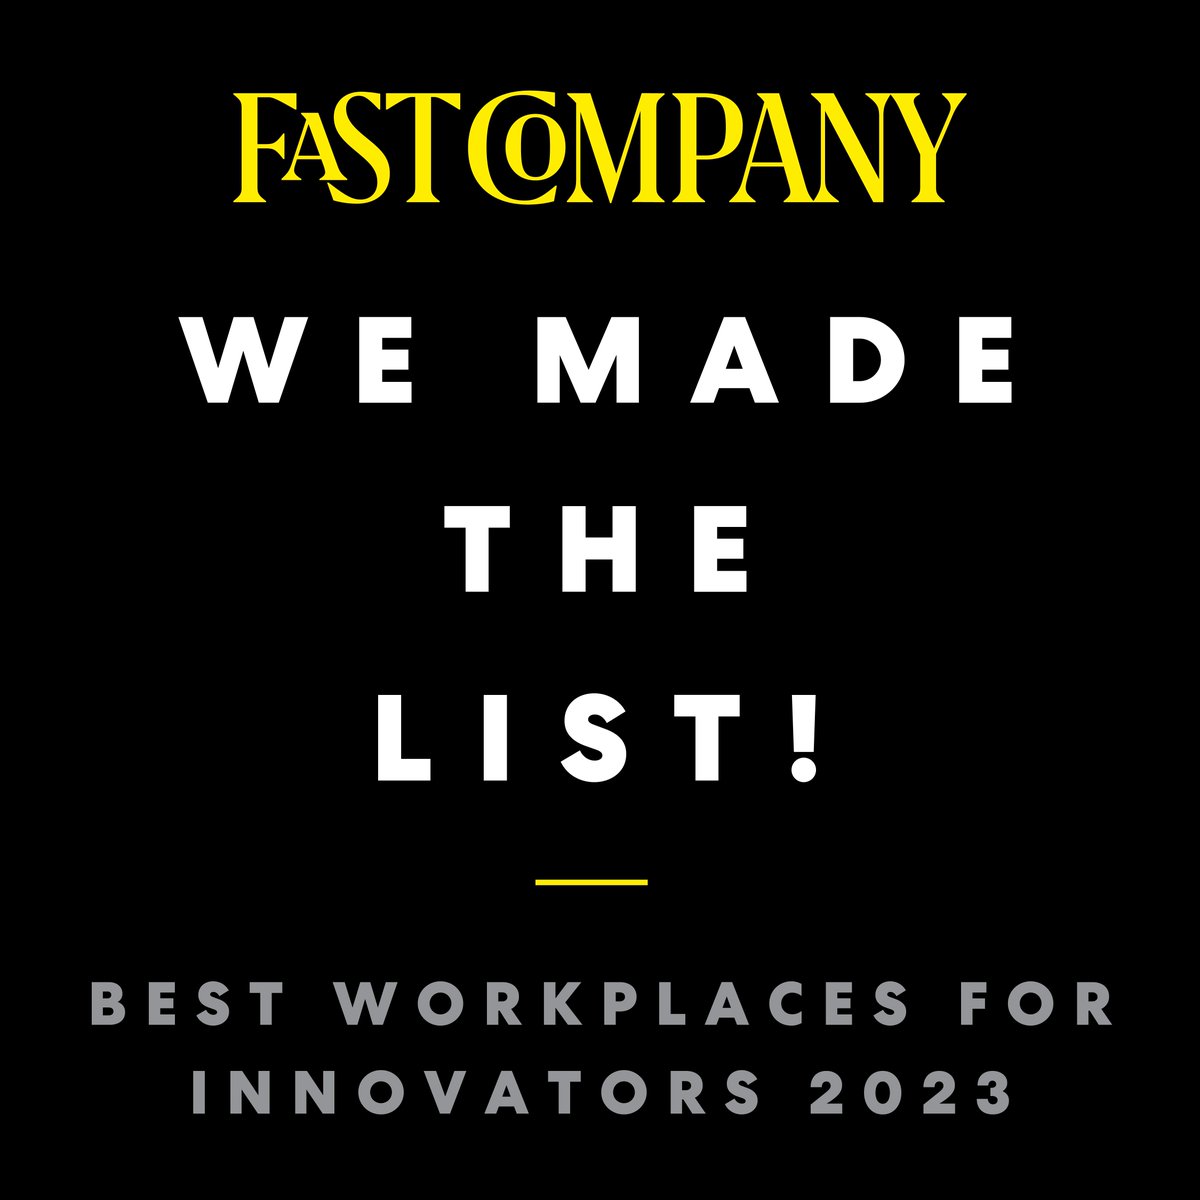 Innovators? You bet. Thanks @FastCompany for recognizing @AmFam as one of the Best Workplaces for Innovators 2023! bit.ly/44dzh82 #FCBestWorkplaces  #iWork4AmFam